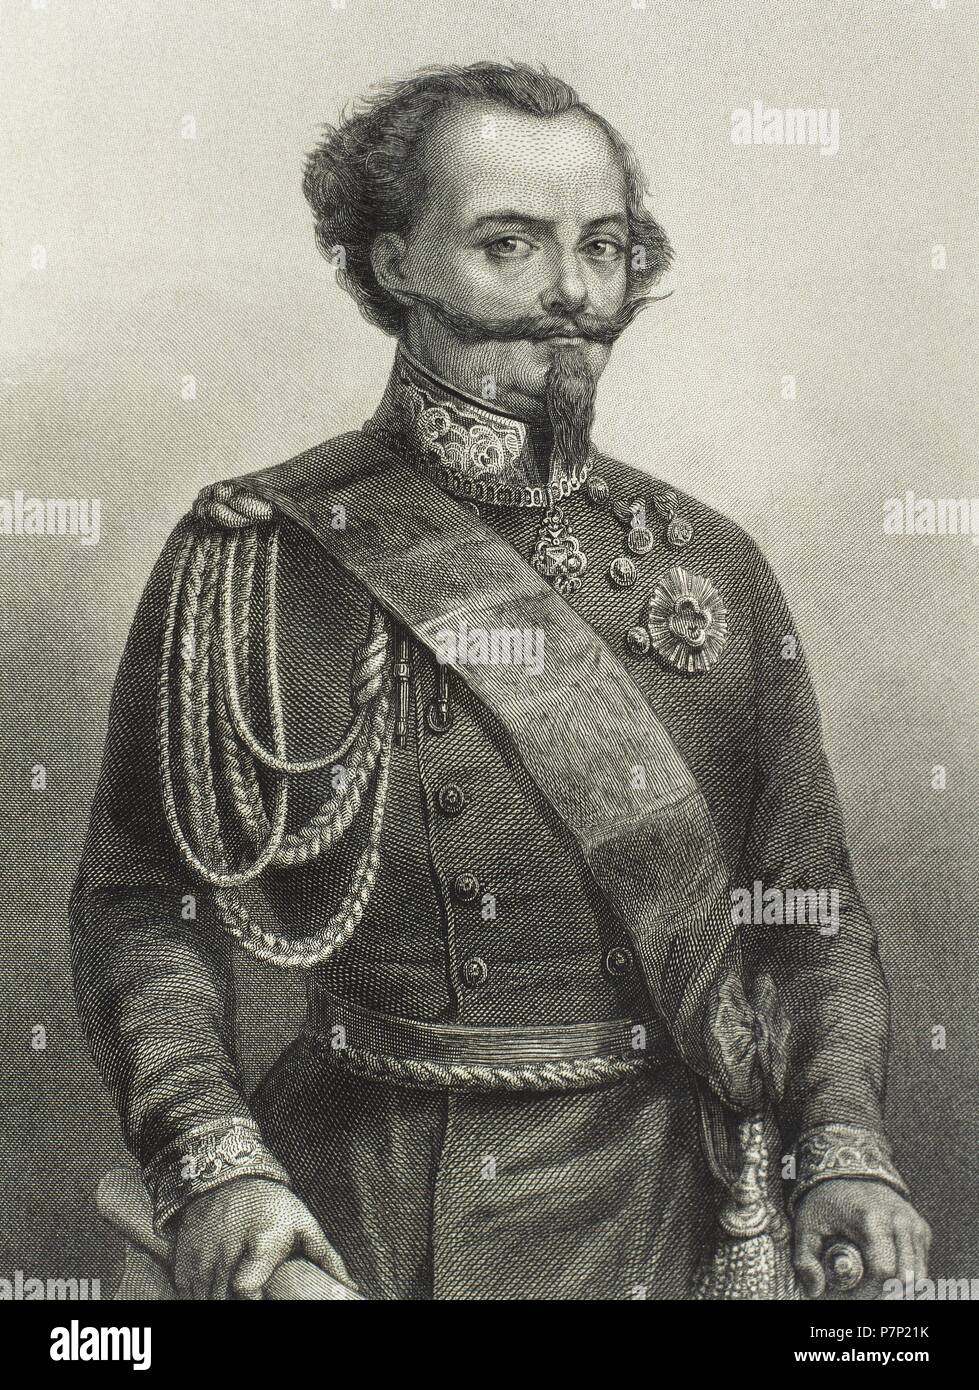 Victor Emmanuel II (1820-1878). King of Sardinia (1849-1861) and king of Italy (1861-1878). Portrait. Engraving. 'Historia Universal', 1881. Stock Photo